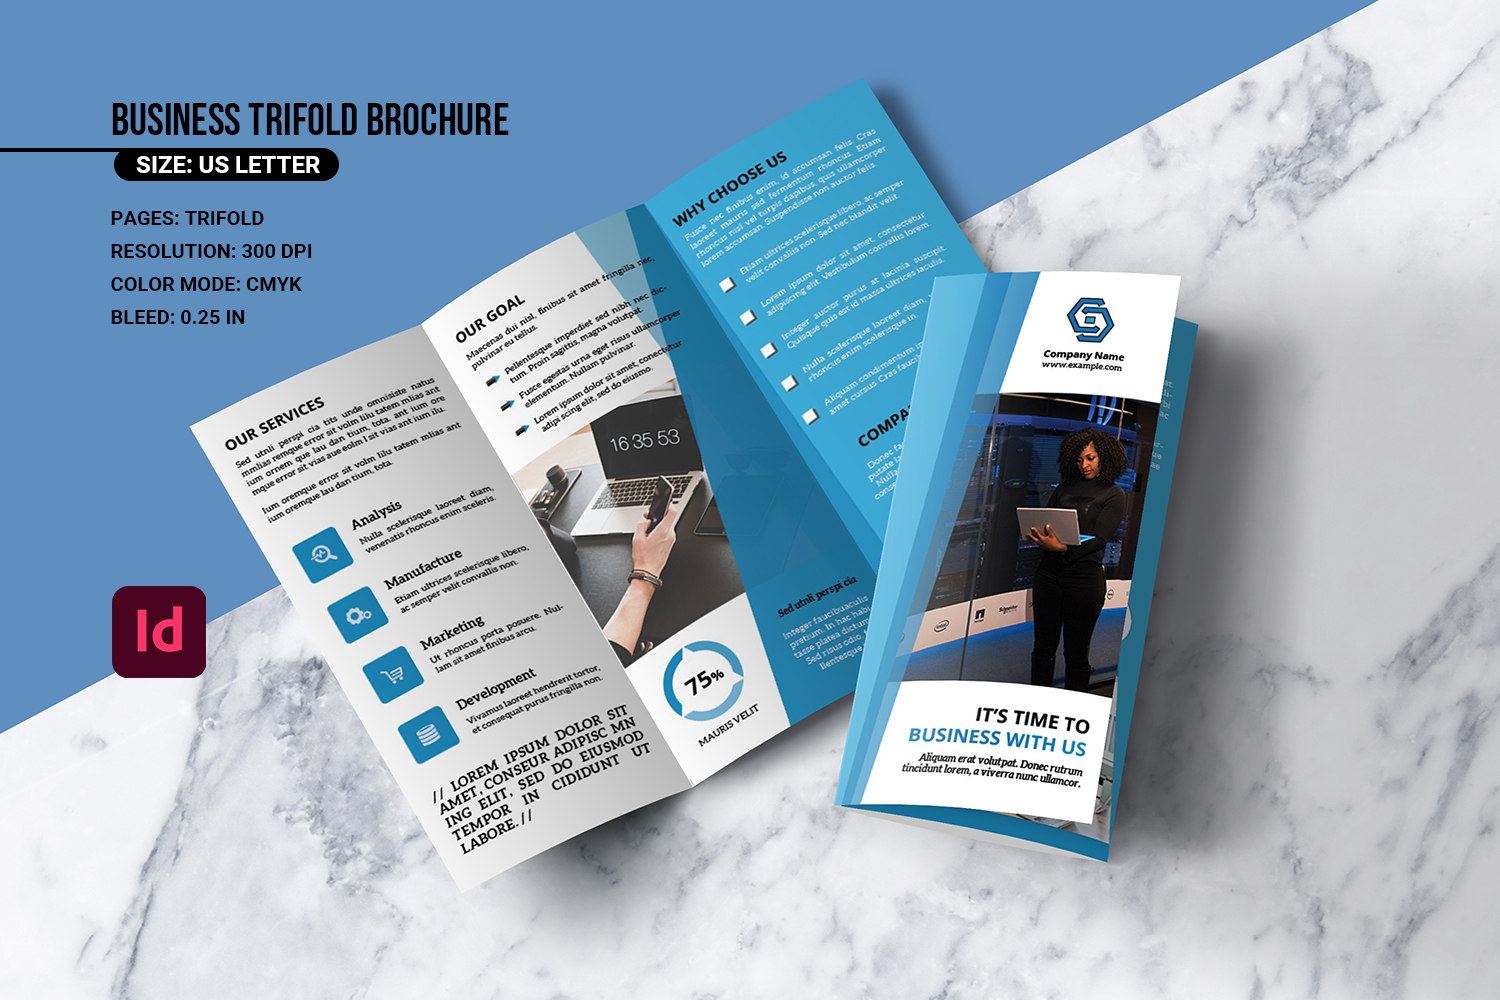 Business Brochure Trifold Adobe Indesign Template